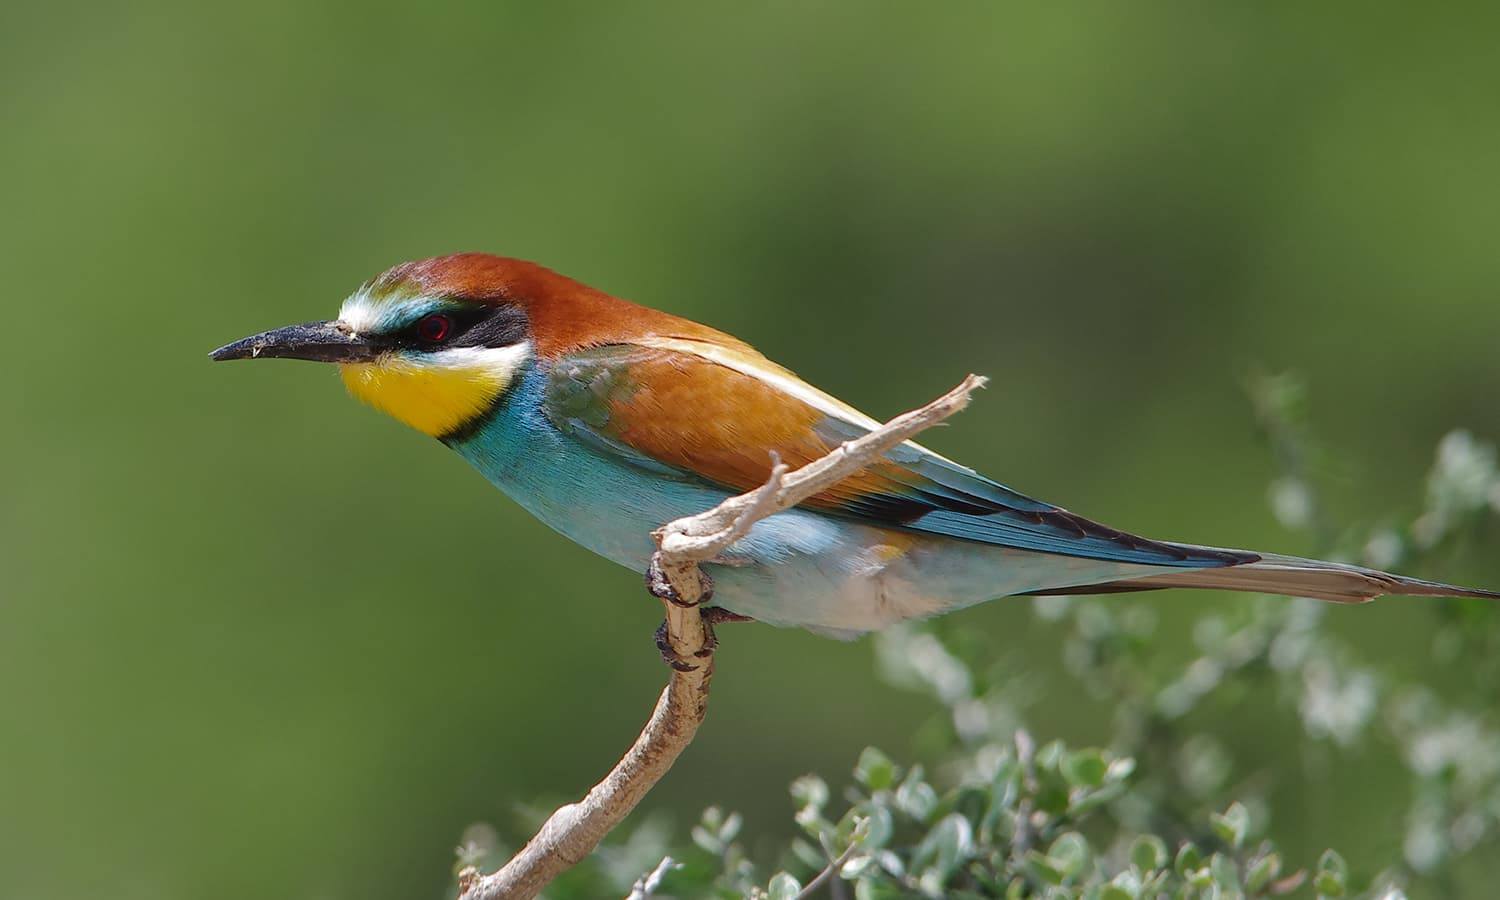  A European bee-eater (Merops apiaster) in Ichkeul National Park, Tunisia. — Photo by Elgollimoh